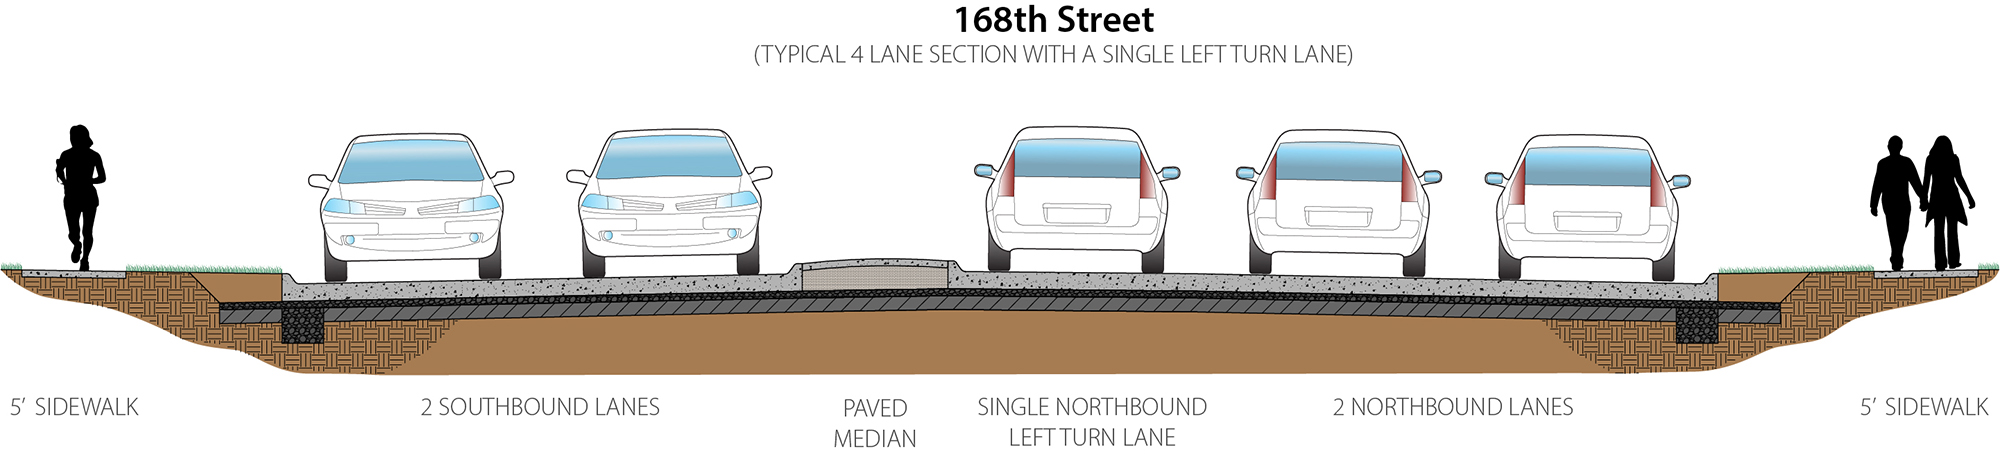 Typical 4 lane cross-section of road with a single left turn lane. Features a 5-foot sidewalk, 2 southbound lanes, paved median, single northbound left turn lane, 2 northbound lanes, and another 5-foot sidewalk.